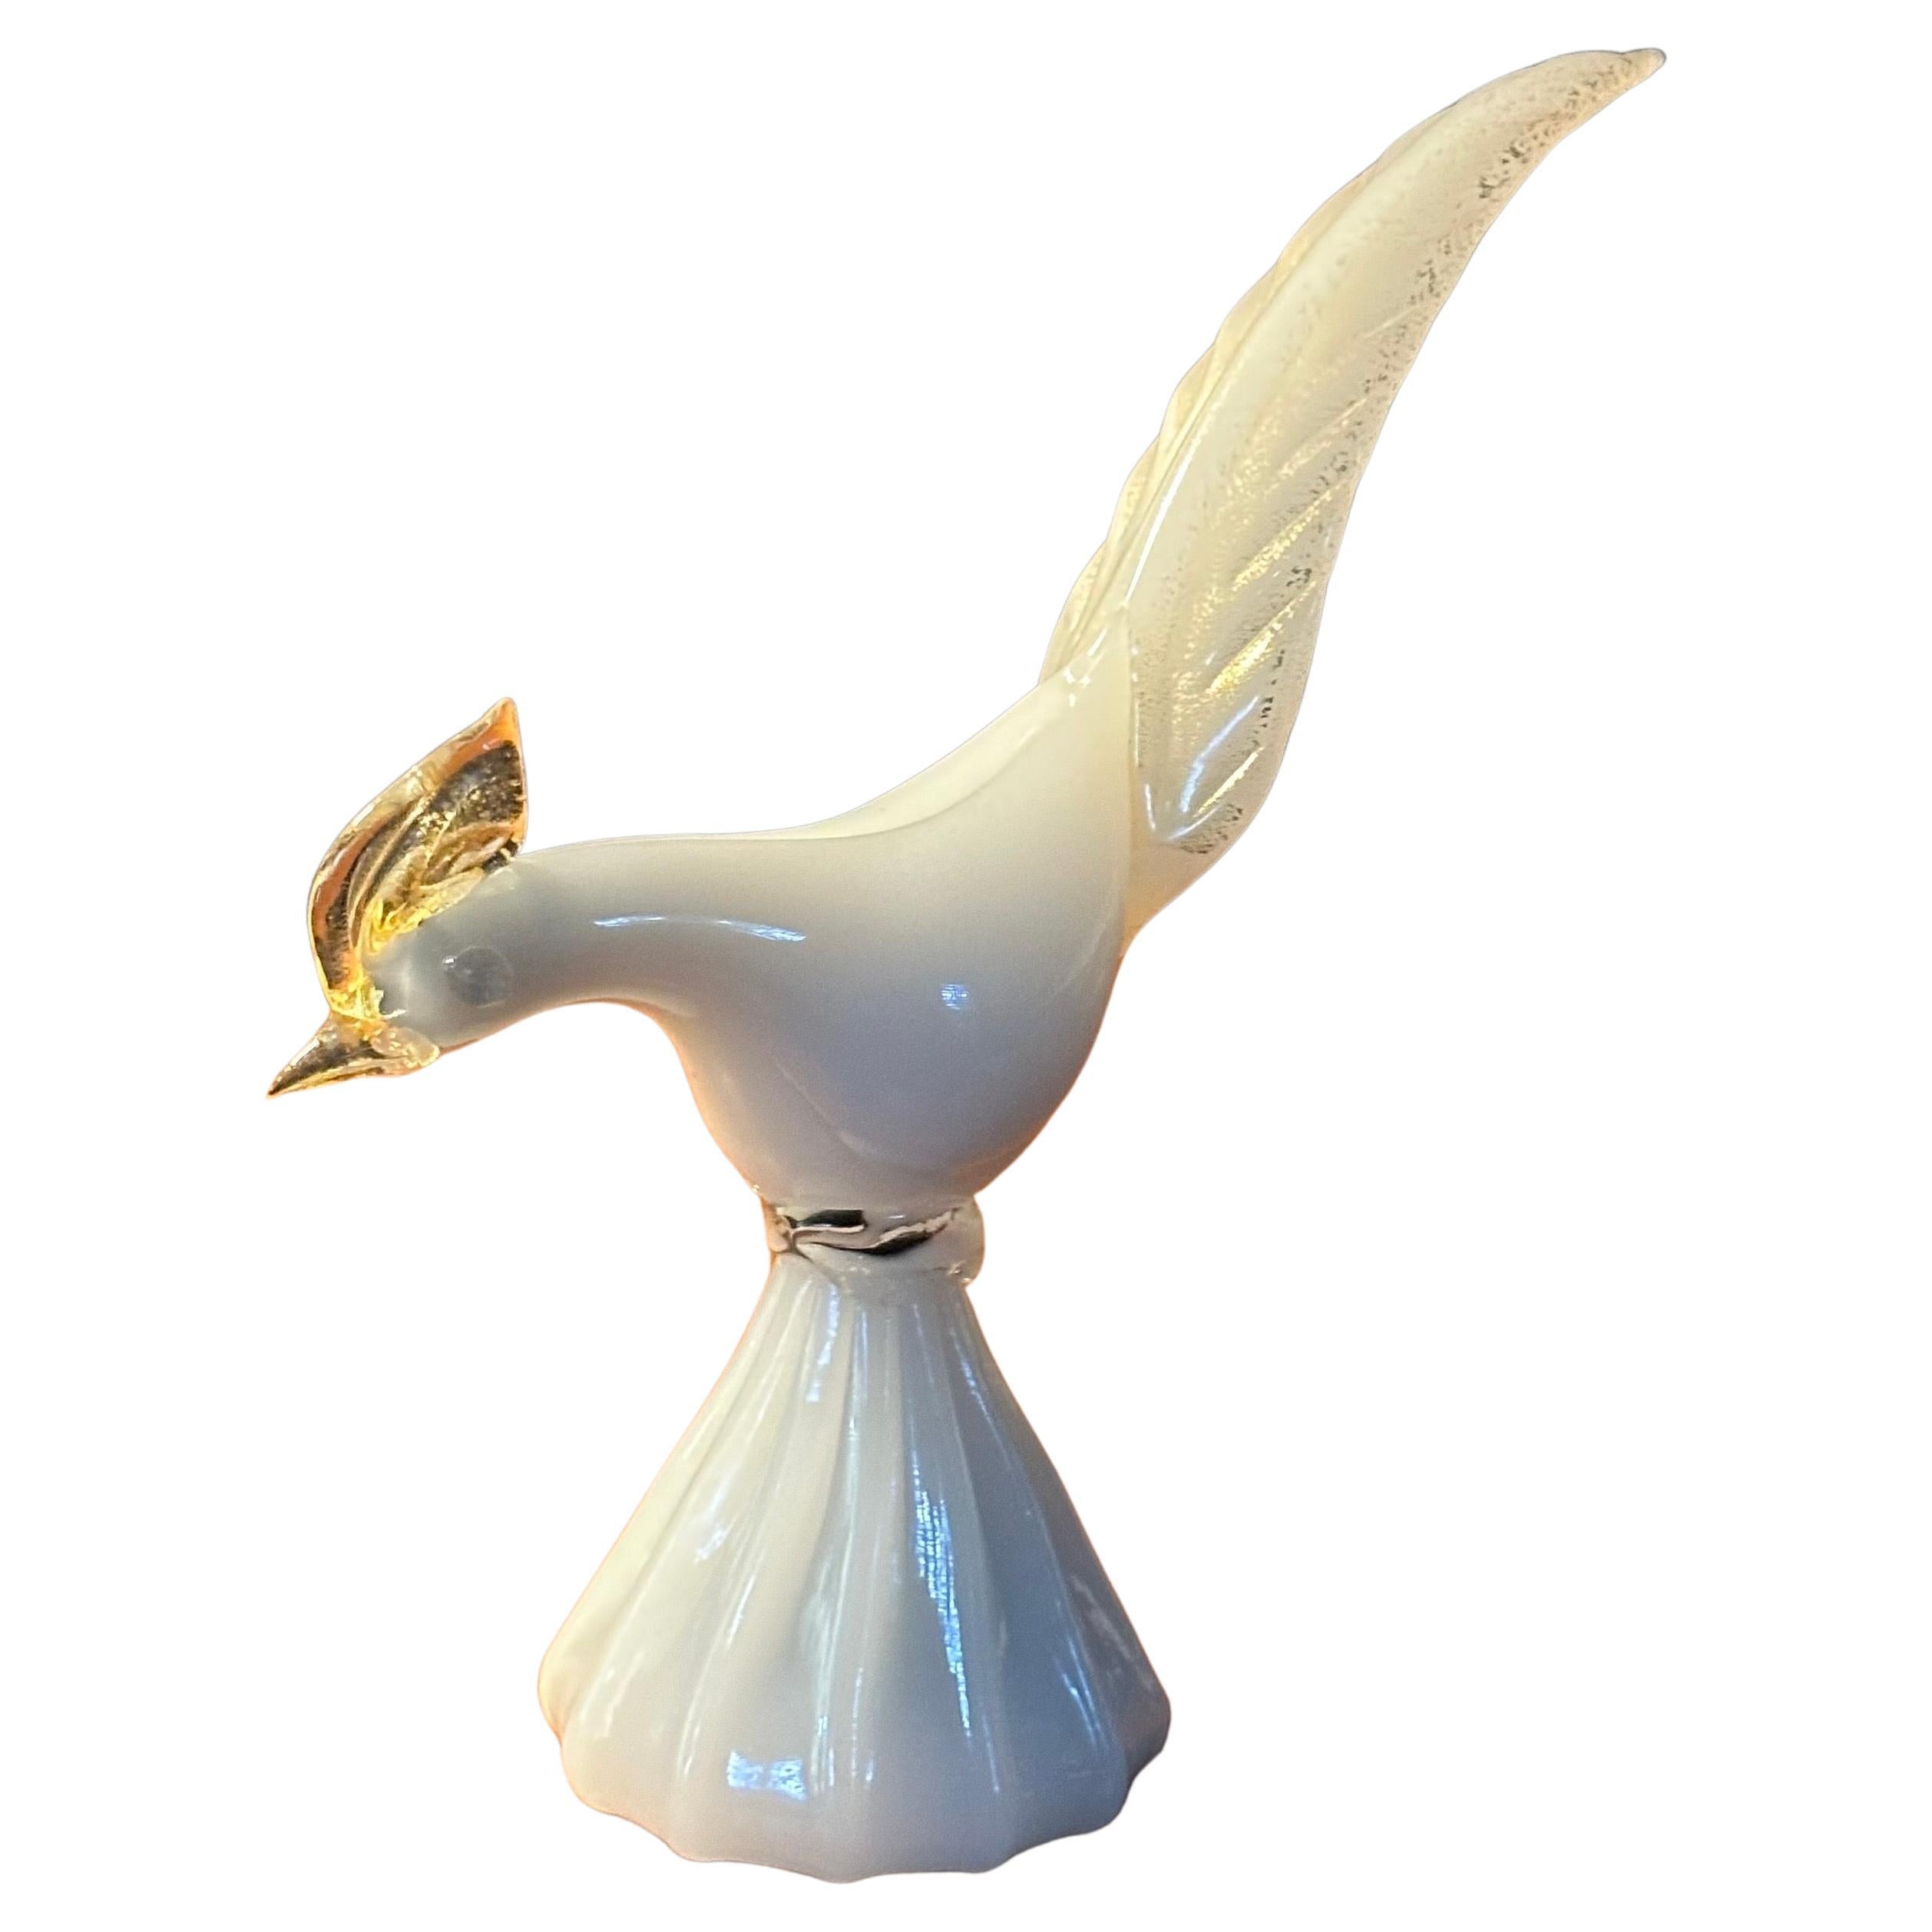 Stylish art glass bird sculpture by Murano Glass, circa 1960s. The piece is in very good vintage condition with no chips or cracks and measures 6.5